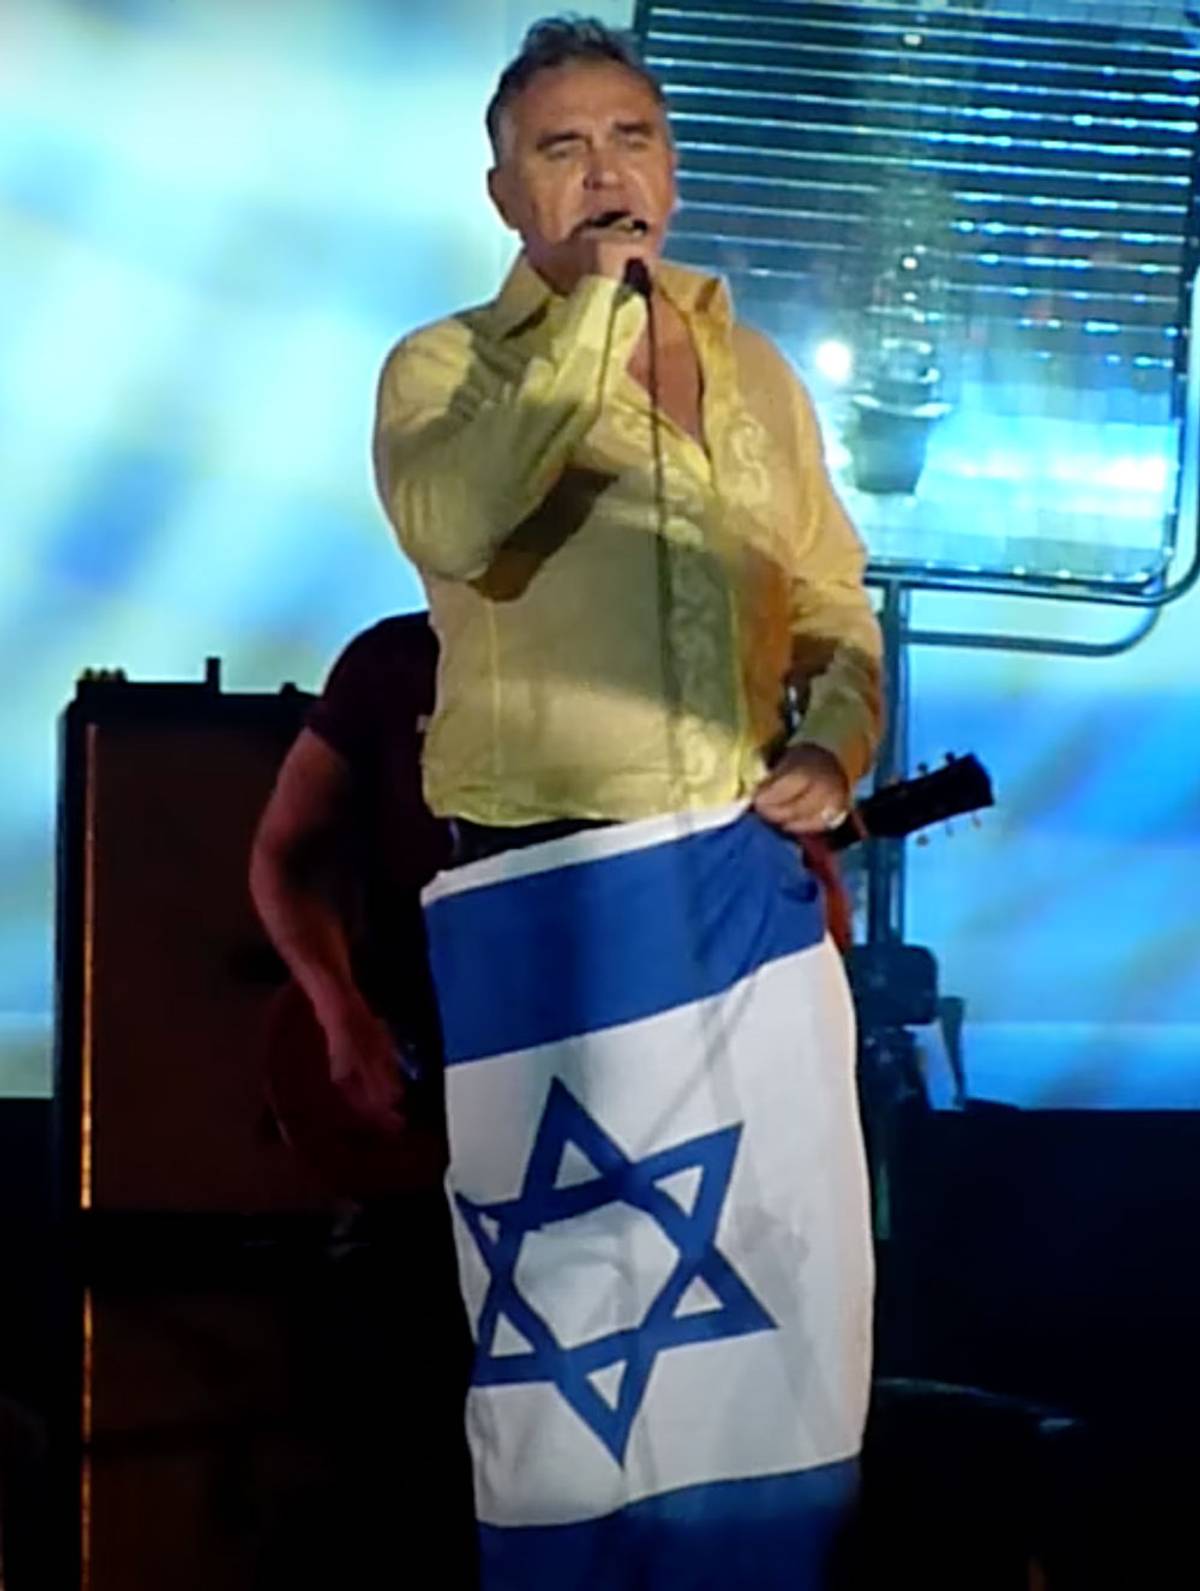 Morrissey wears an Israeli flag during a 2012 show